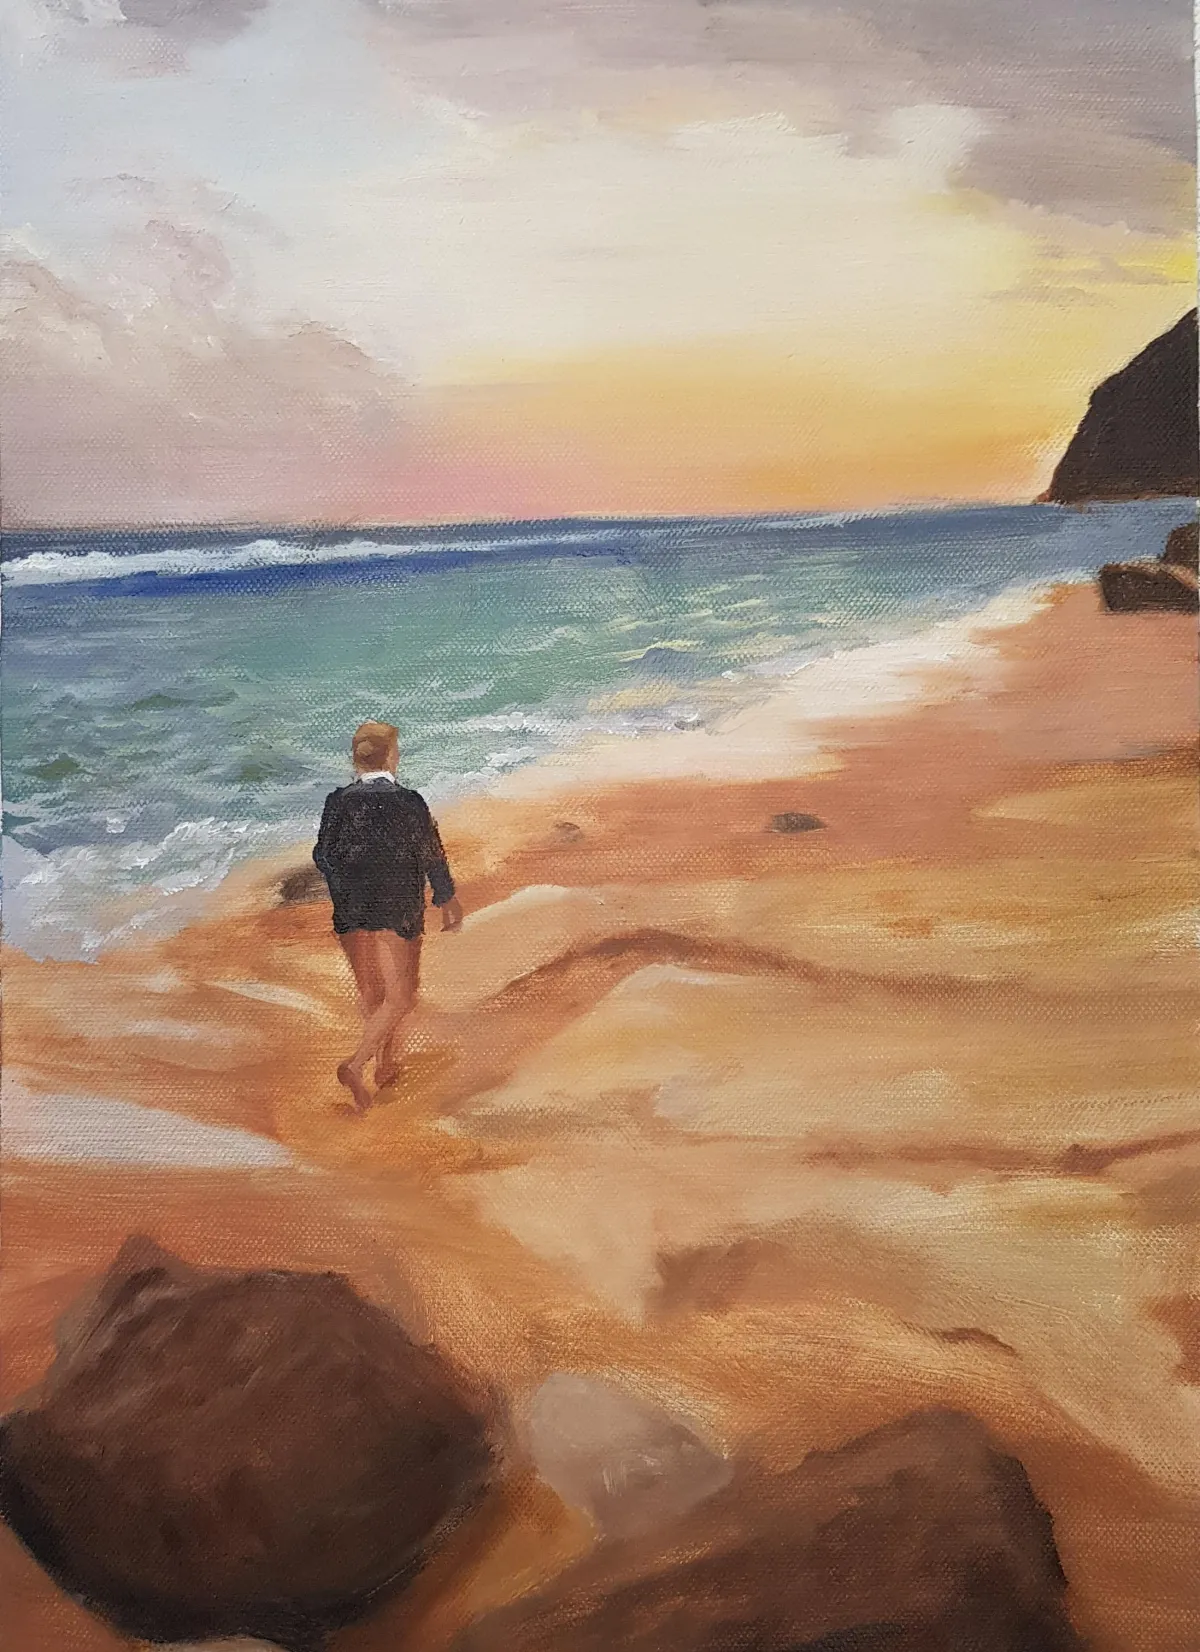 A painting of a girl walking the beach at sunset on a beach in Bali